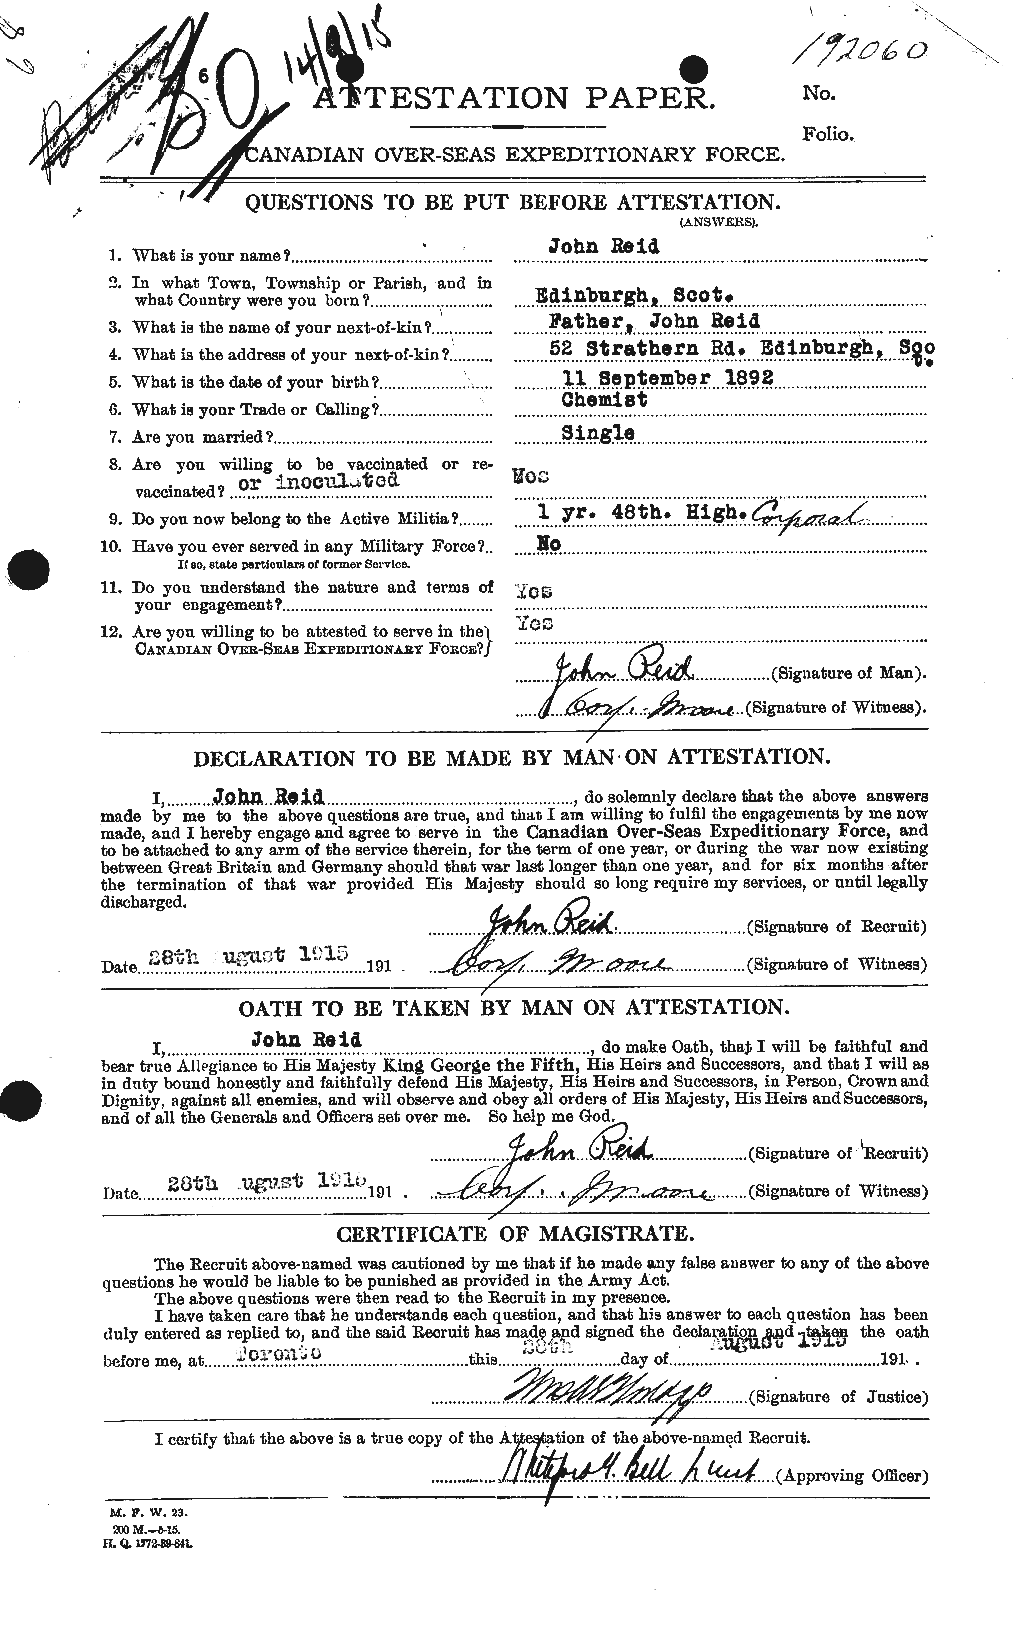 Personnel Records of the First World War - CEF 598786a